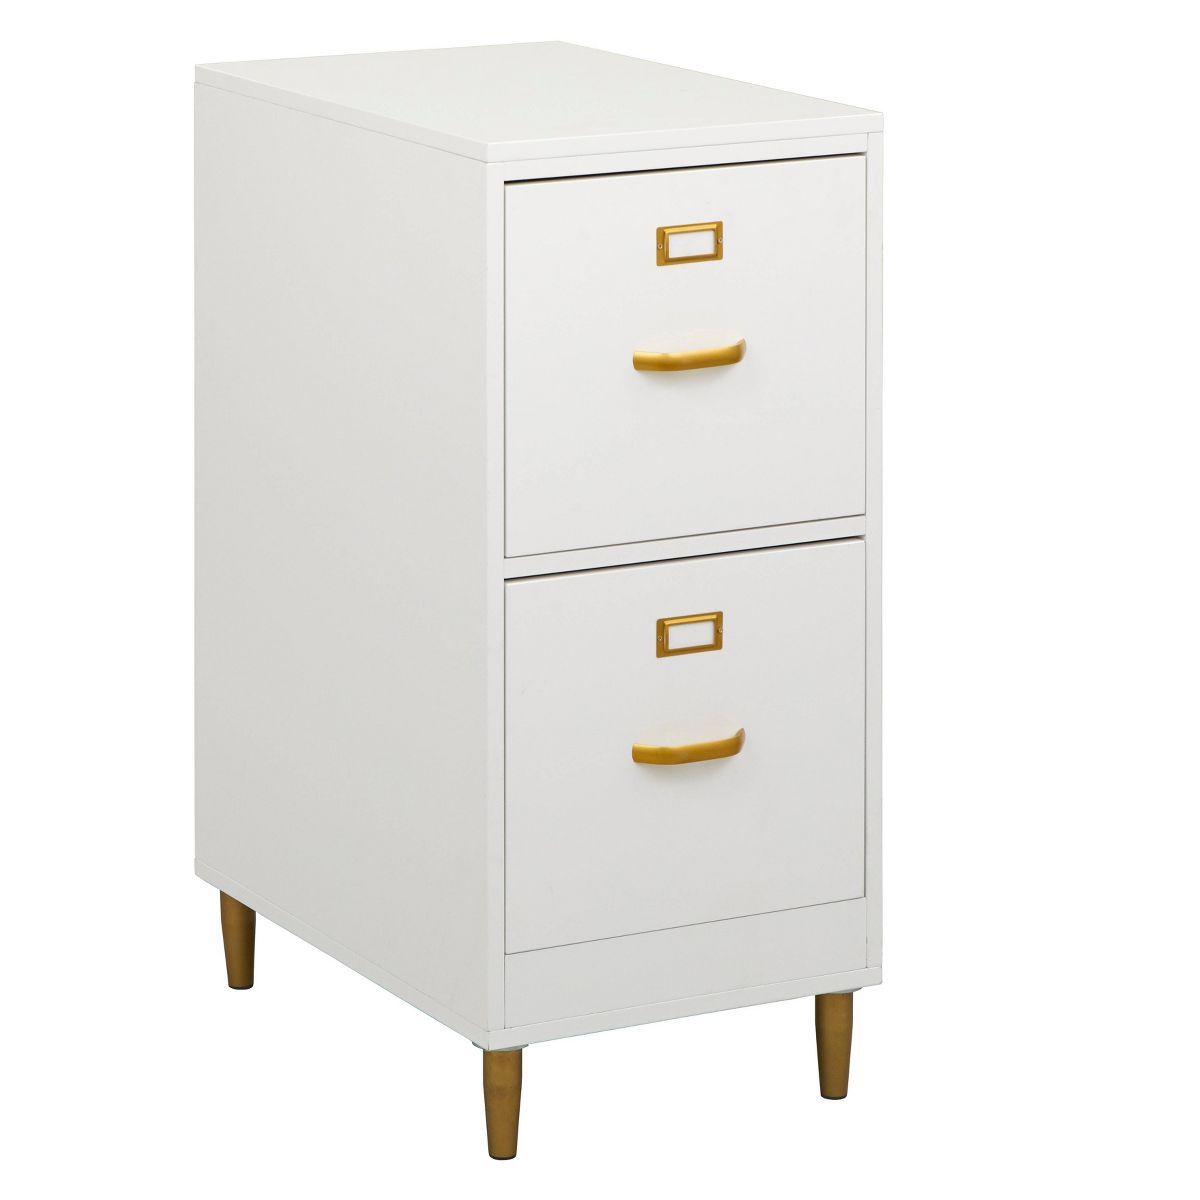 Dixie 2 Drawer Filing Cabinet White - Buylateral | Target